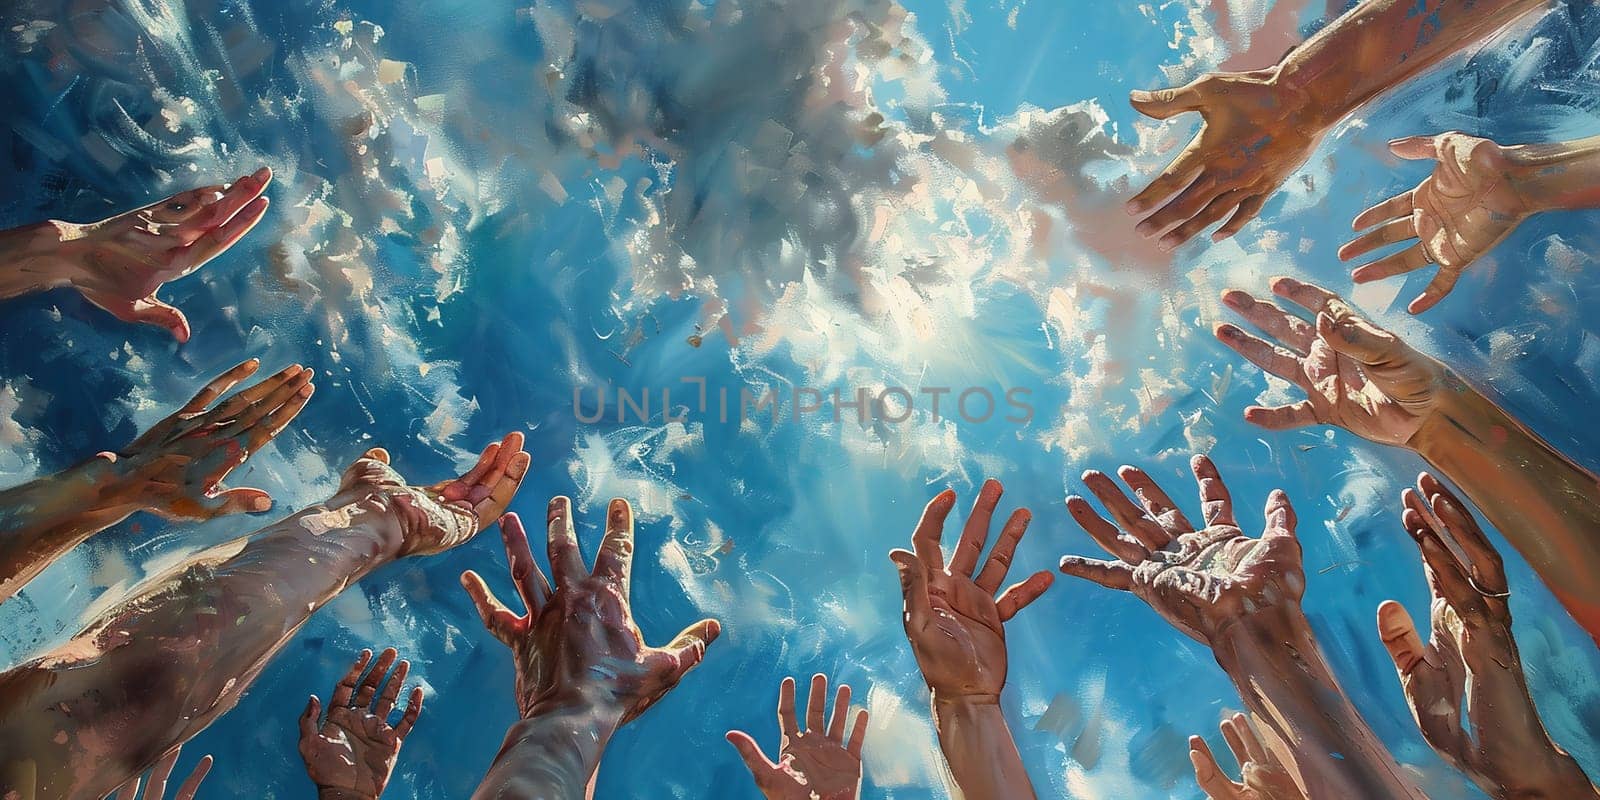 Human hands on sky background by Andelov13